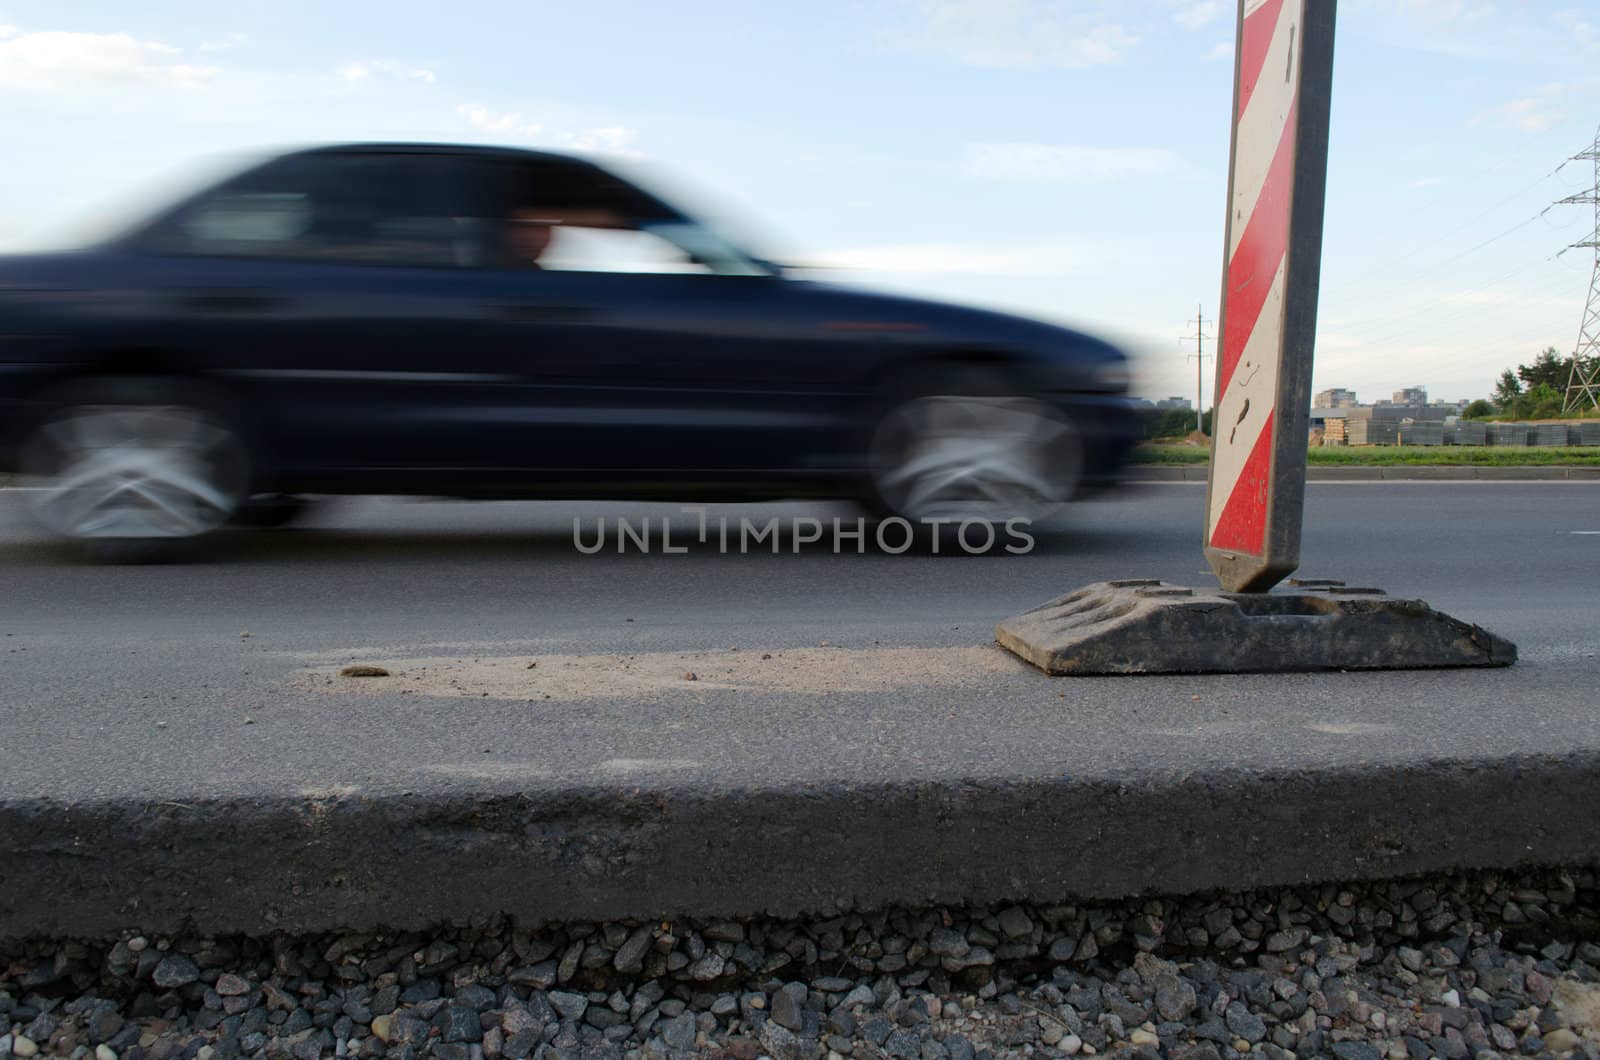 Road asphalt pavement thickness passing car and warning sign.